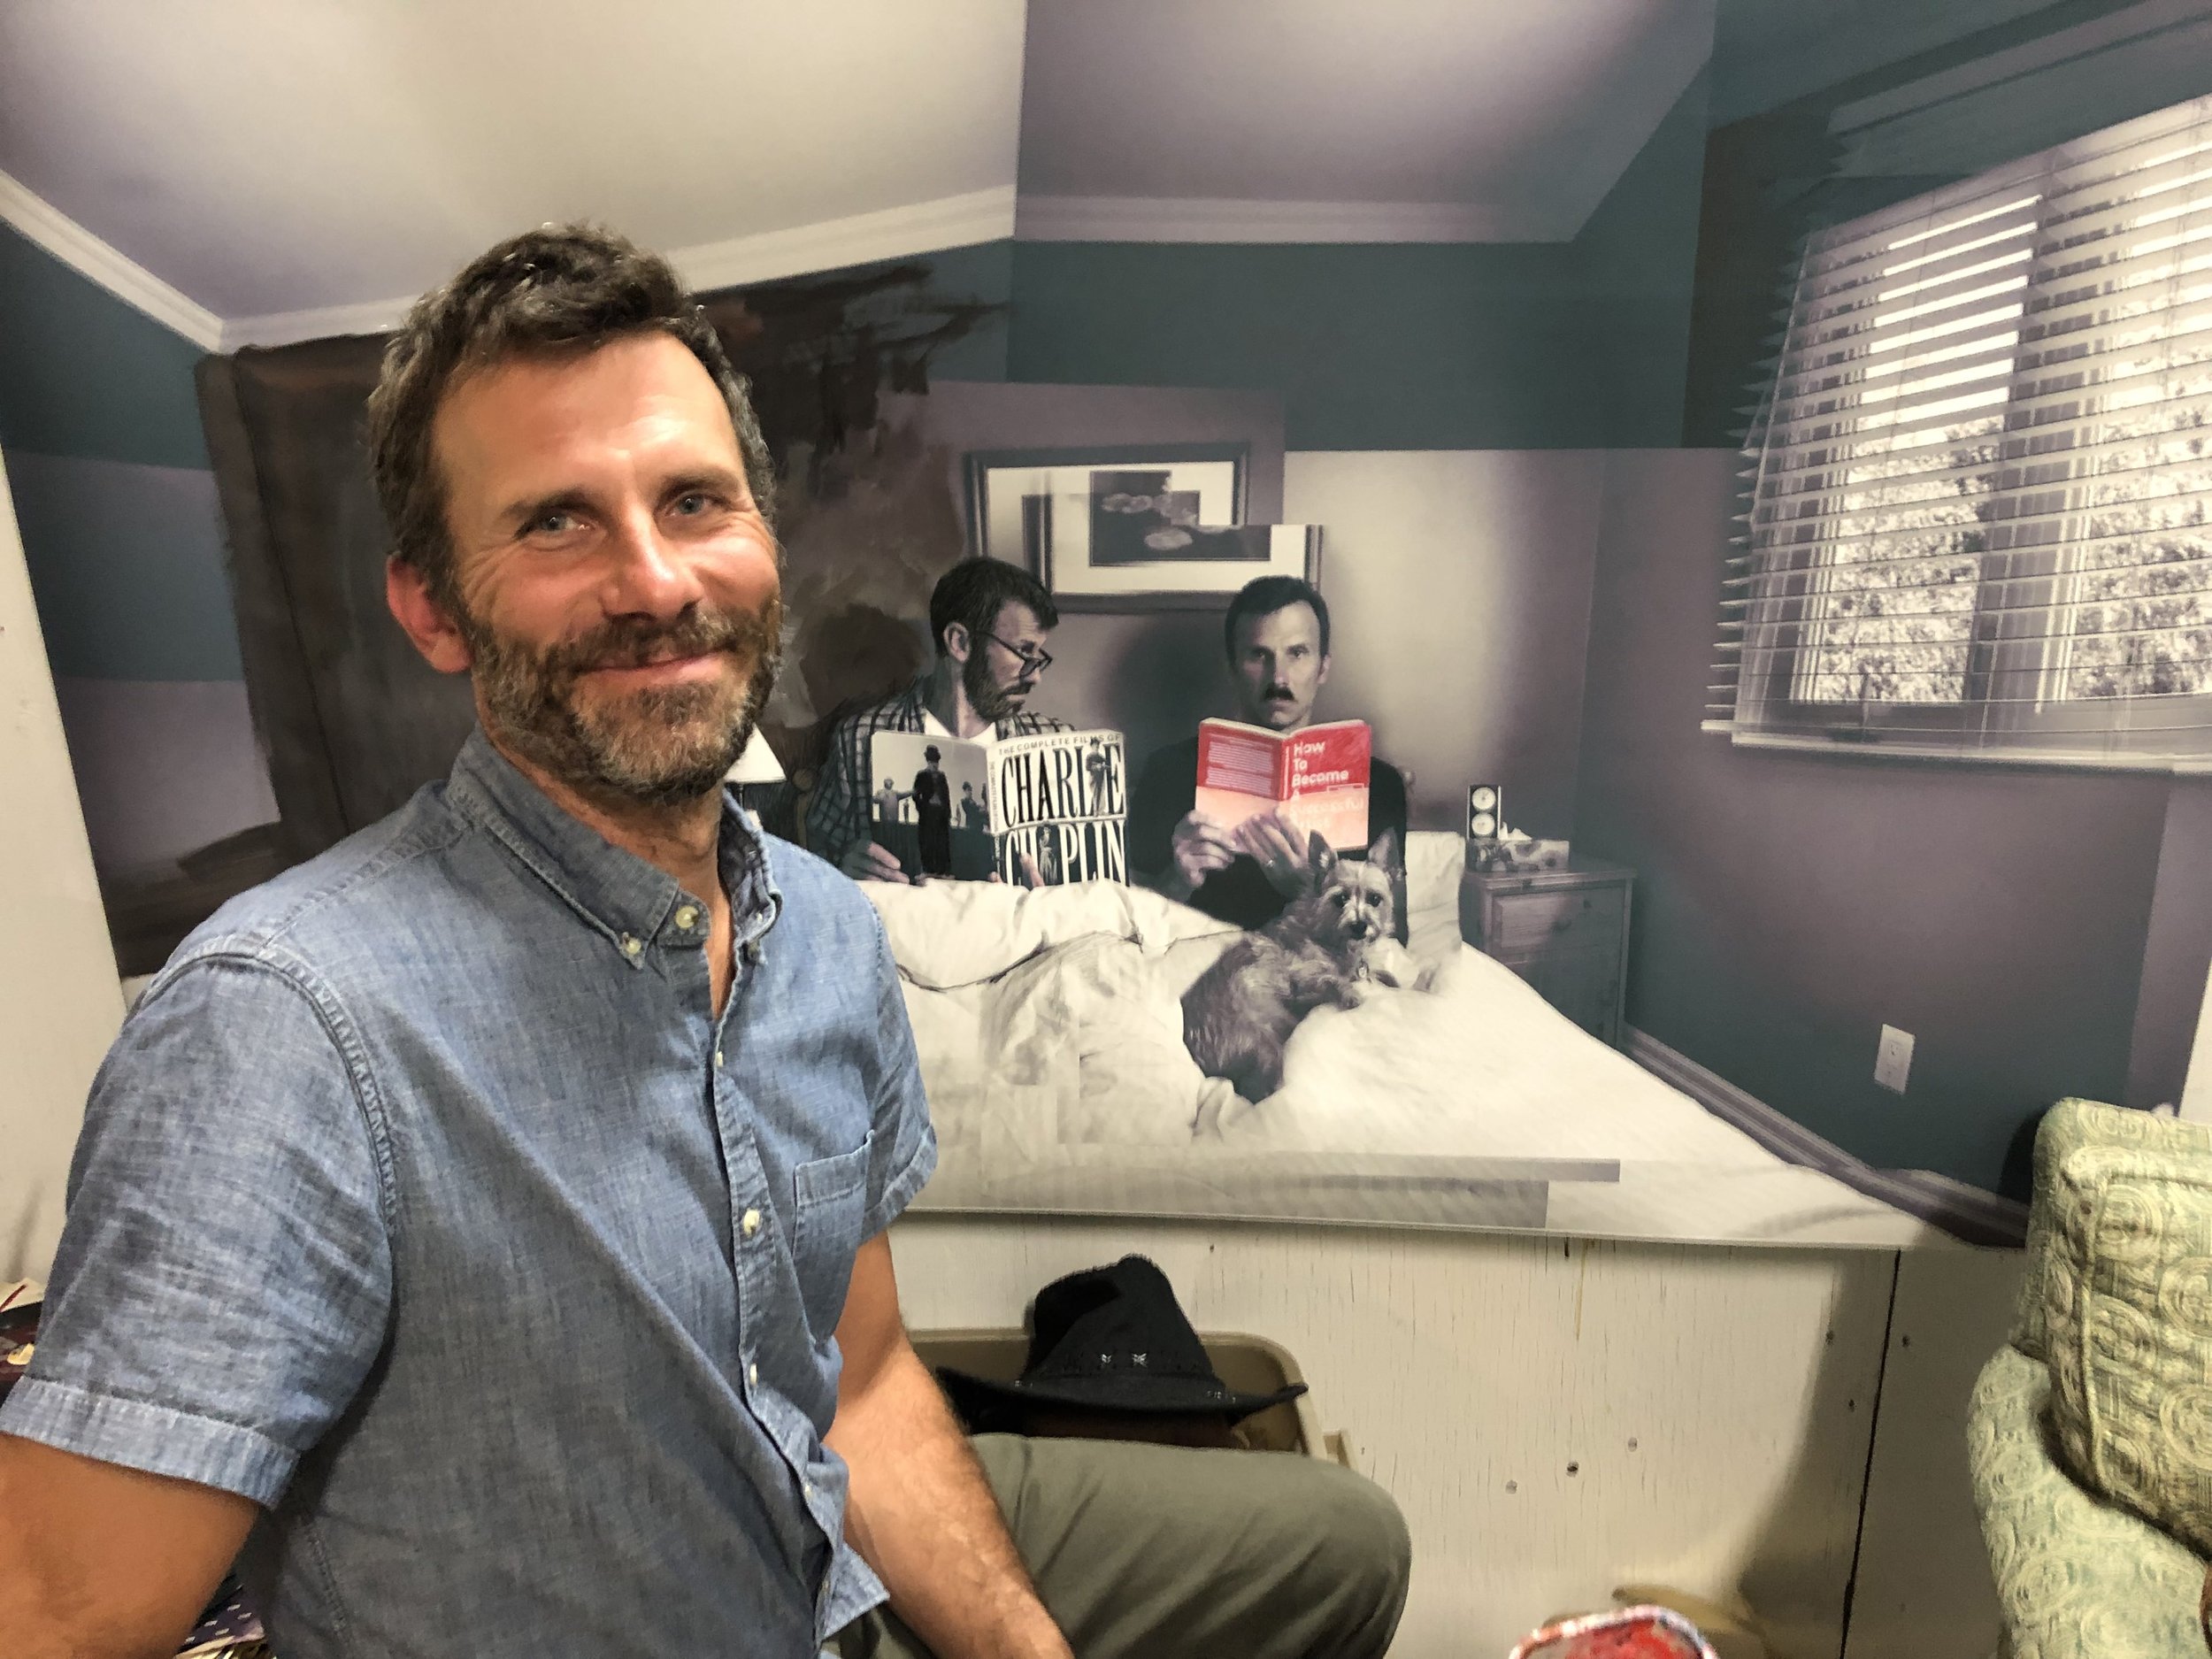   Jason Bomers sits in his studio, smiling. His hair and beard is salt and pepper. He wears a blue button-up shirt and green pants. Behind him is an image of two men in bed, with a small dog, one is reading “The complete films of Charlie Chaplin,” th